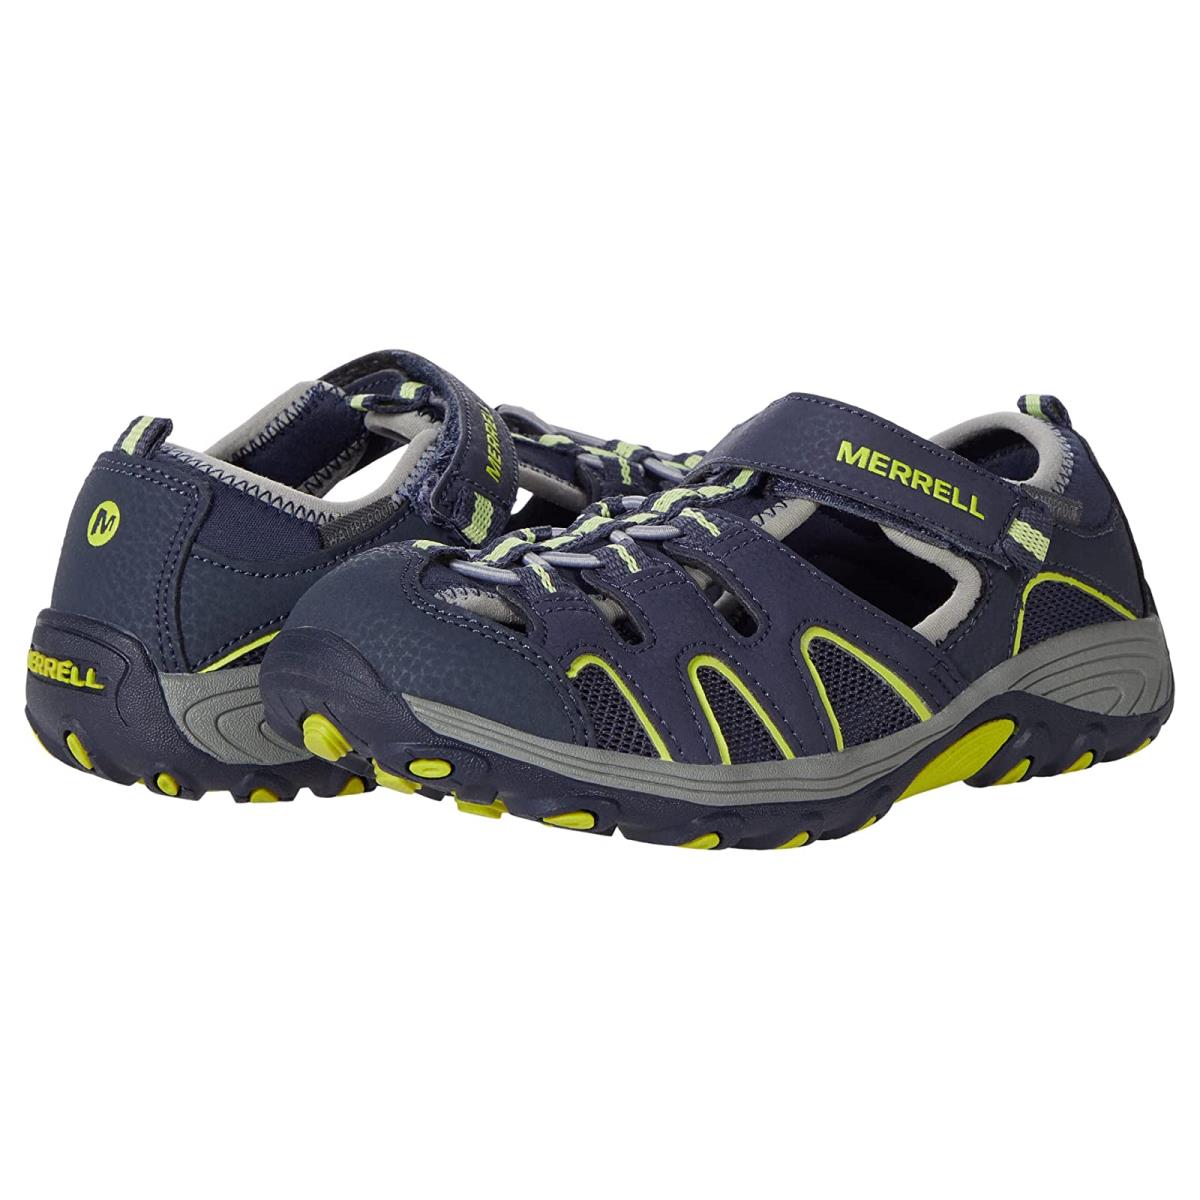 Boy`s Shoes Merrell Kids Hydro H2O Toddler/little Kid/big Kid Navy/Lime